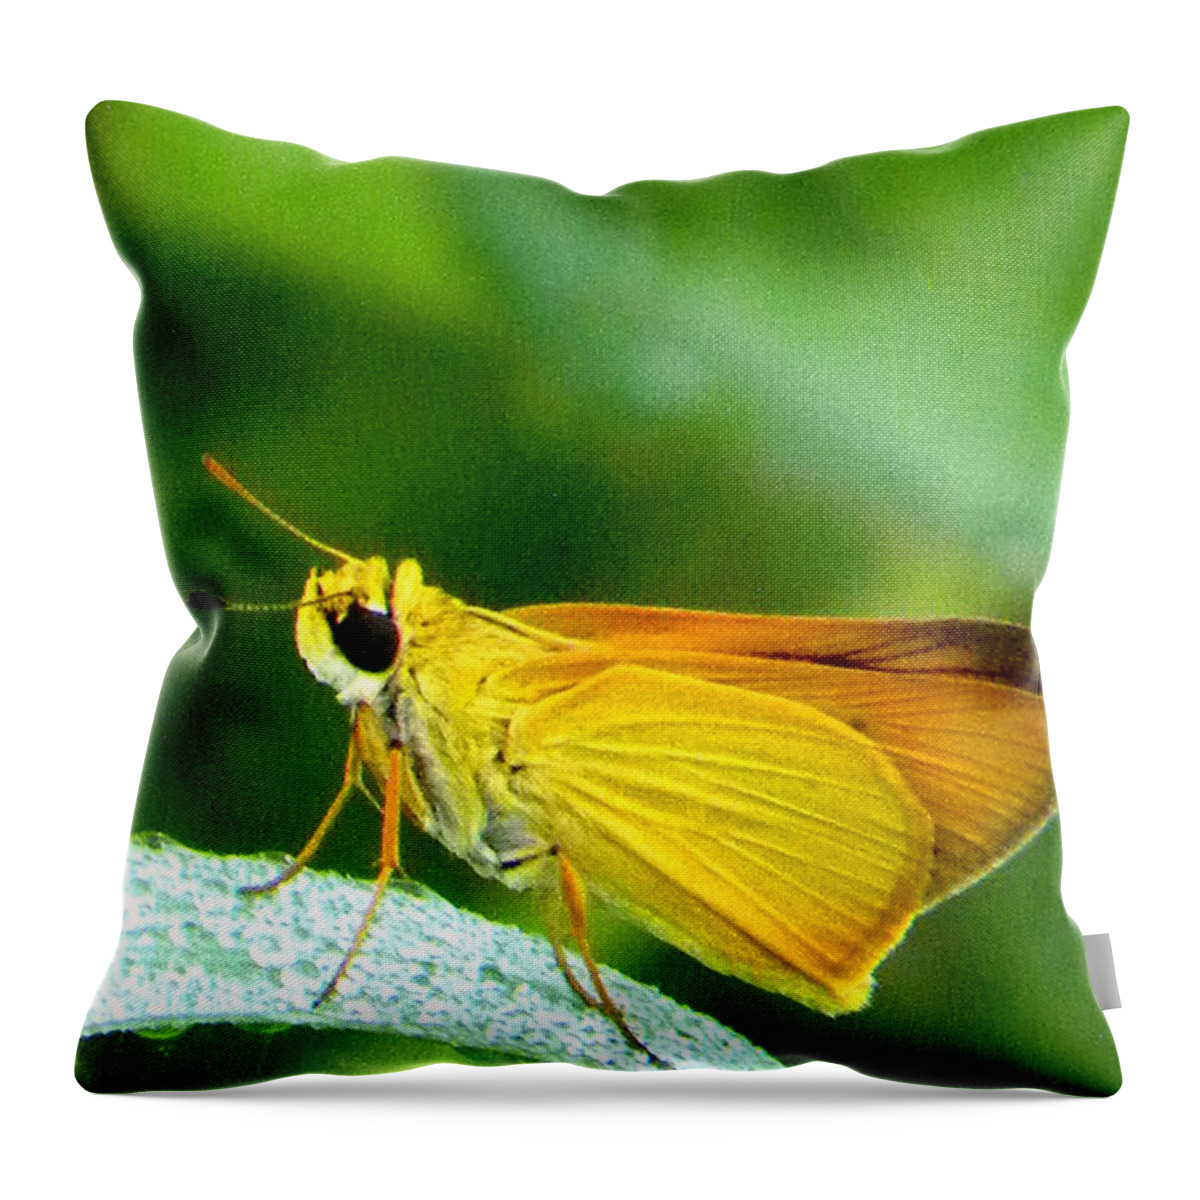 Skipper Butterfly Throw Pillow featuring the photograph Southern Skipperling Butterfly 001 by Christopher Mercer